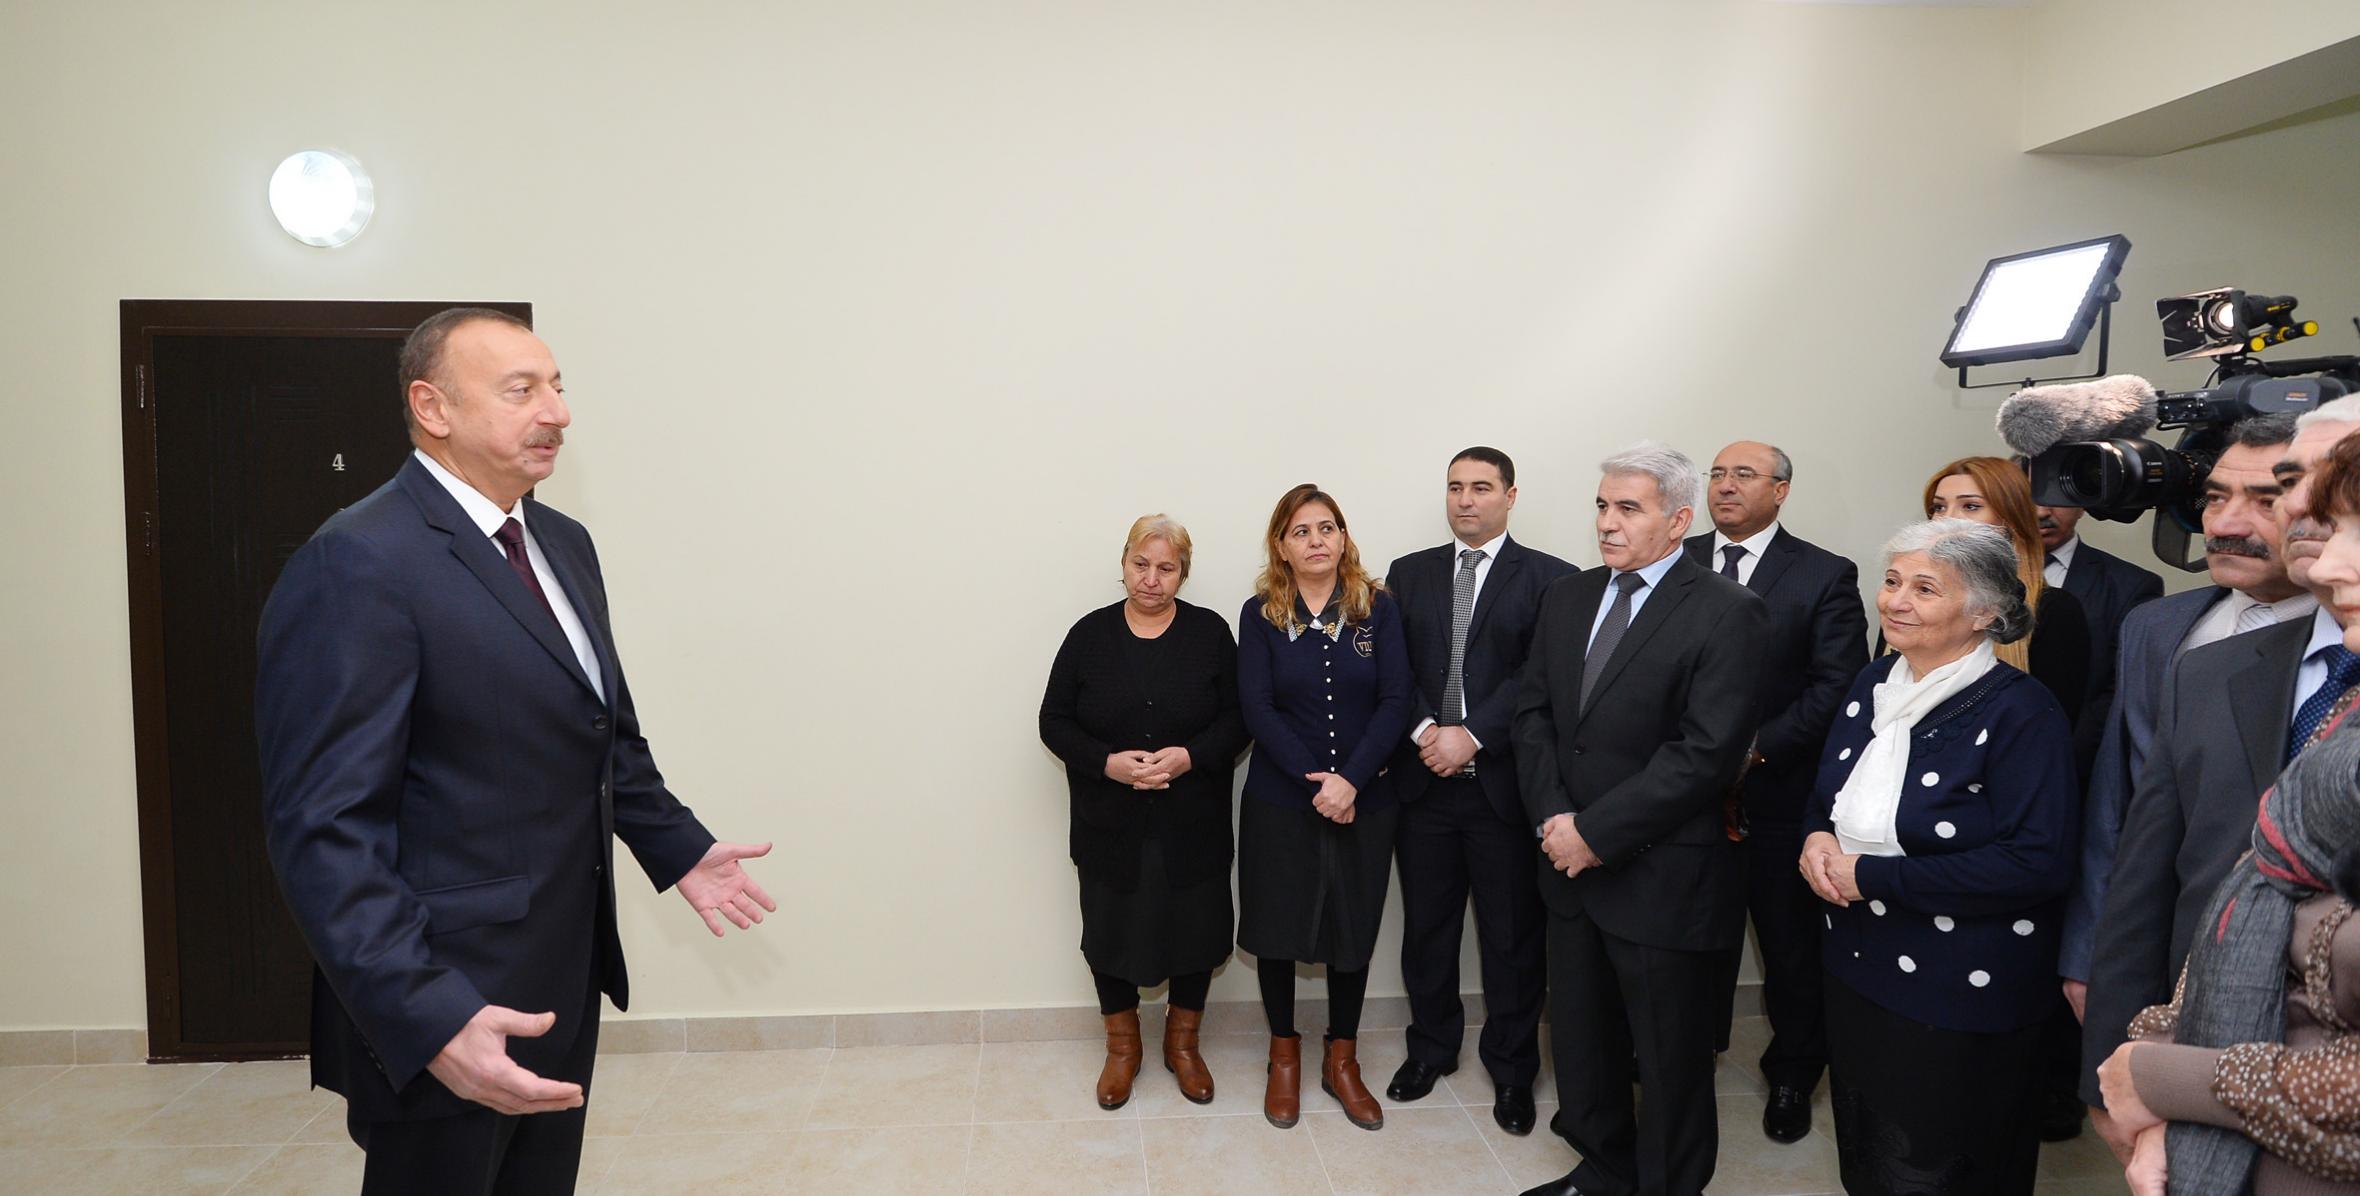 Speech by Ilham Aliyev at the opening  of the new residential building in Sabunchu district